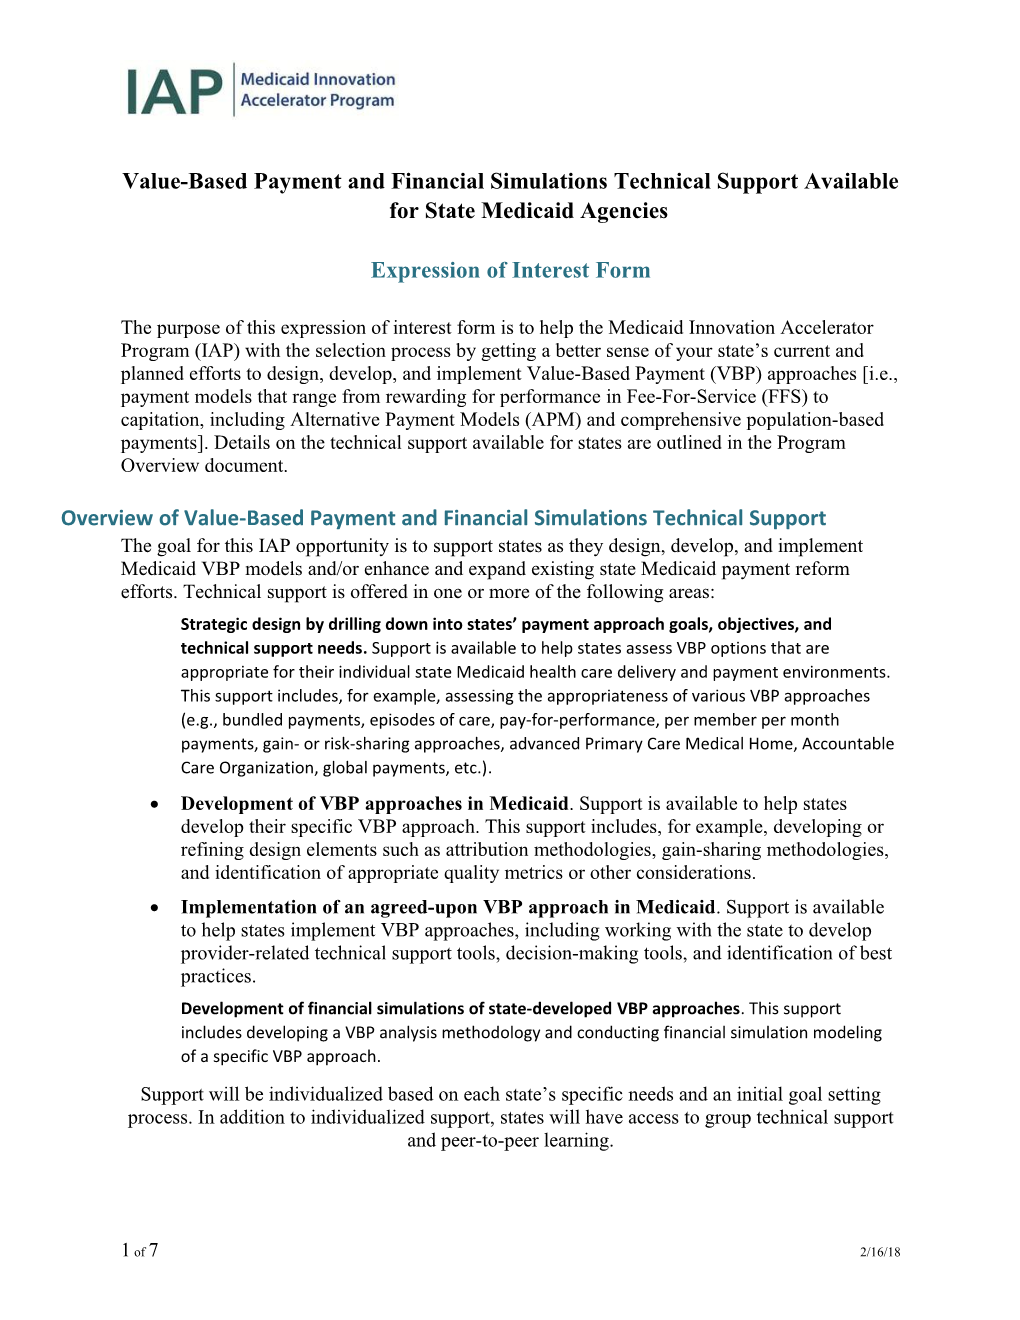 Value-Based Payments and Financial Simulations Expression of Interest Form